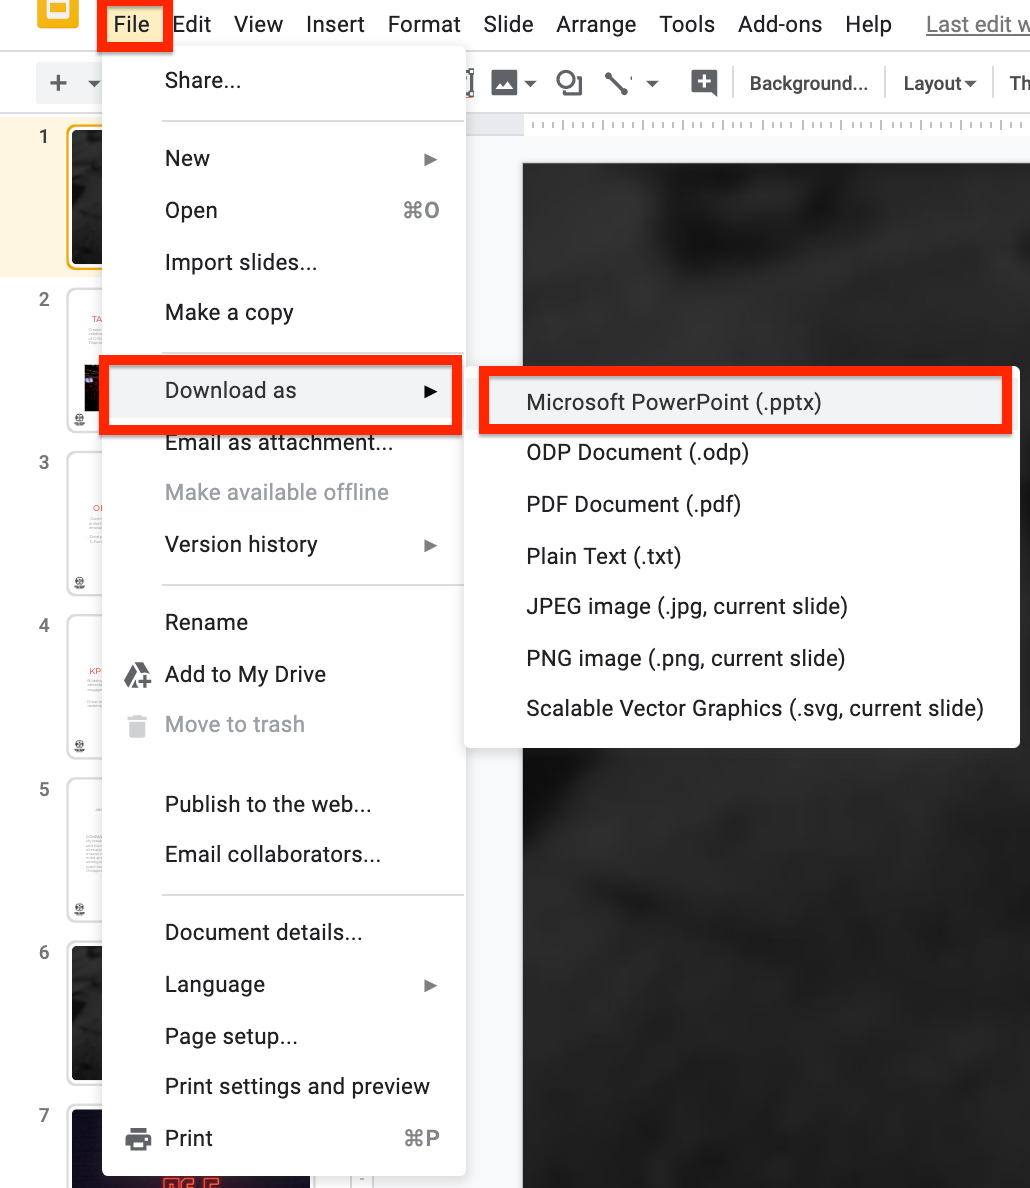 How To Import Google Slides Into Powerpoint?